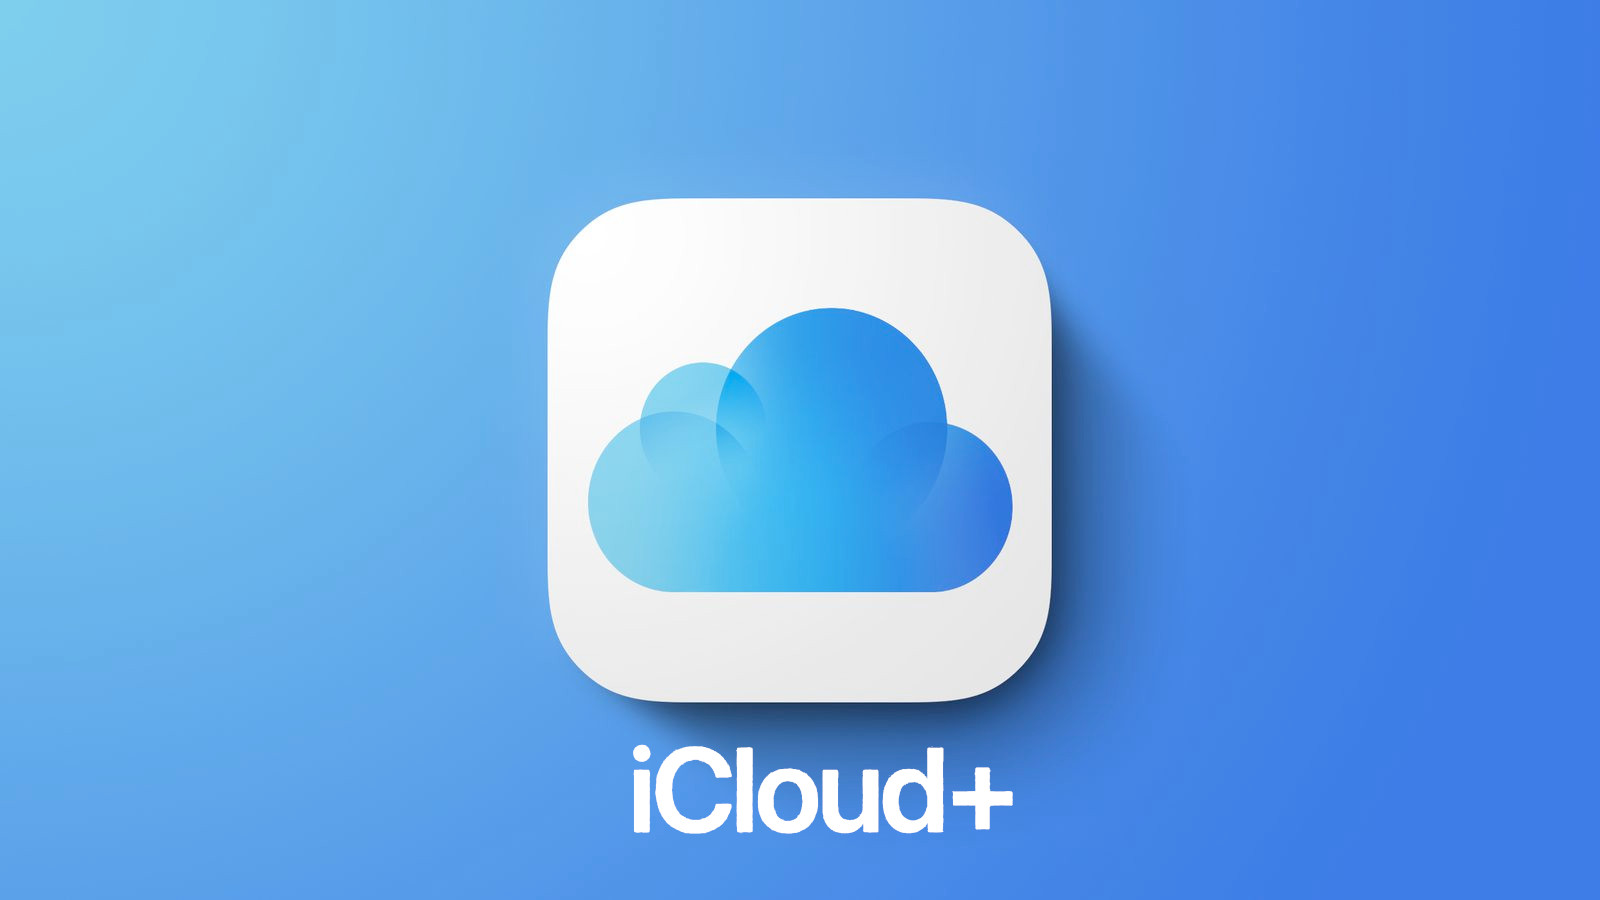 iCloud+ 50GB - 3 Months Trial Subscription US (ONLY FOR NEW ACCOUNTS)